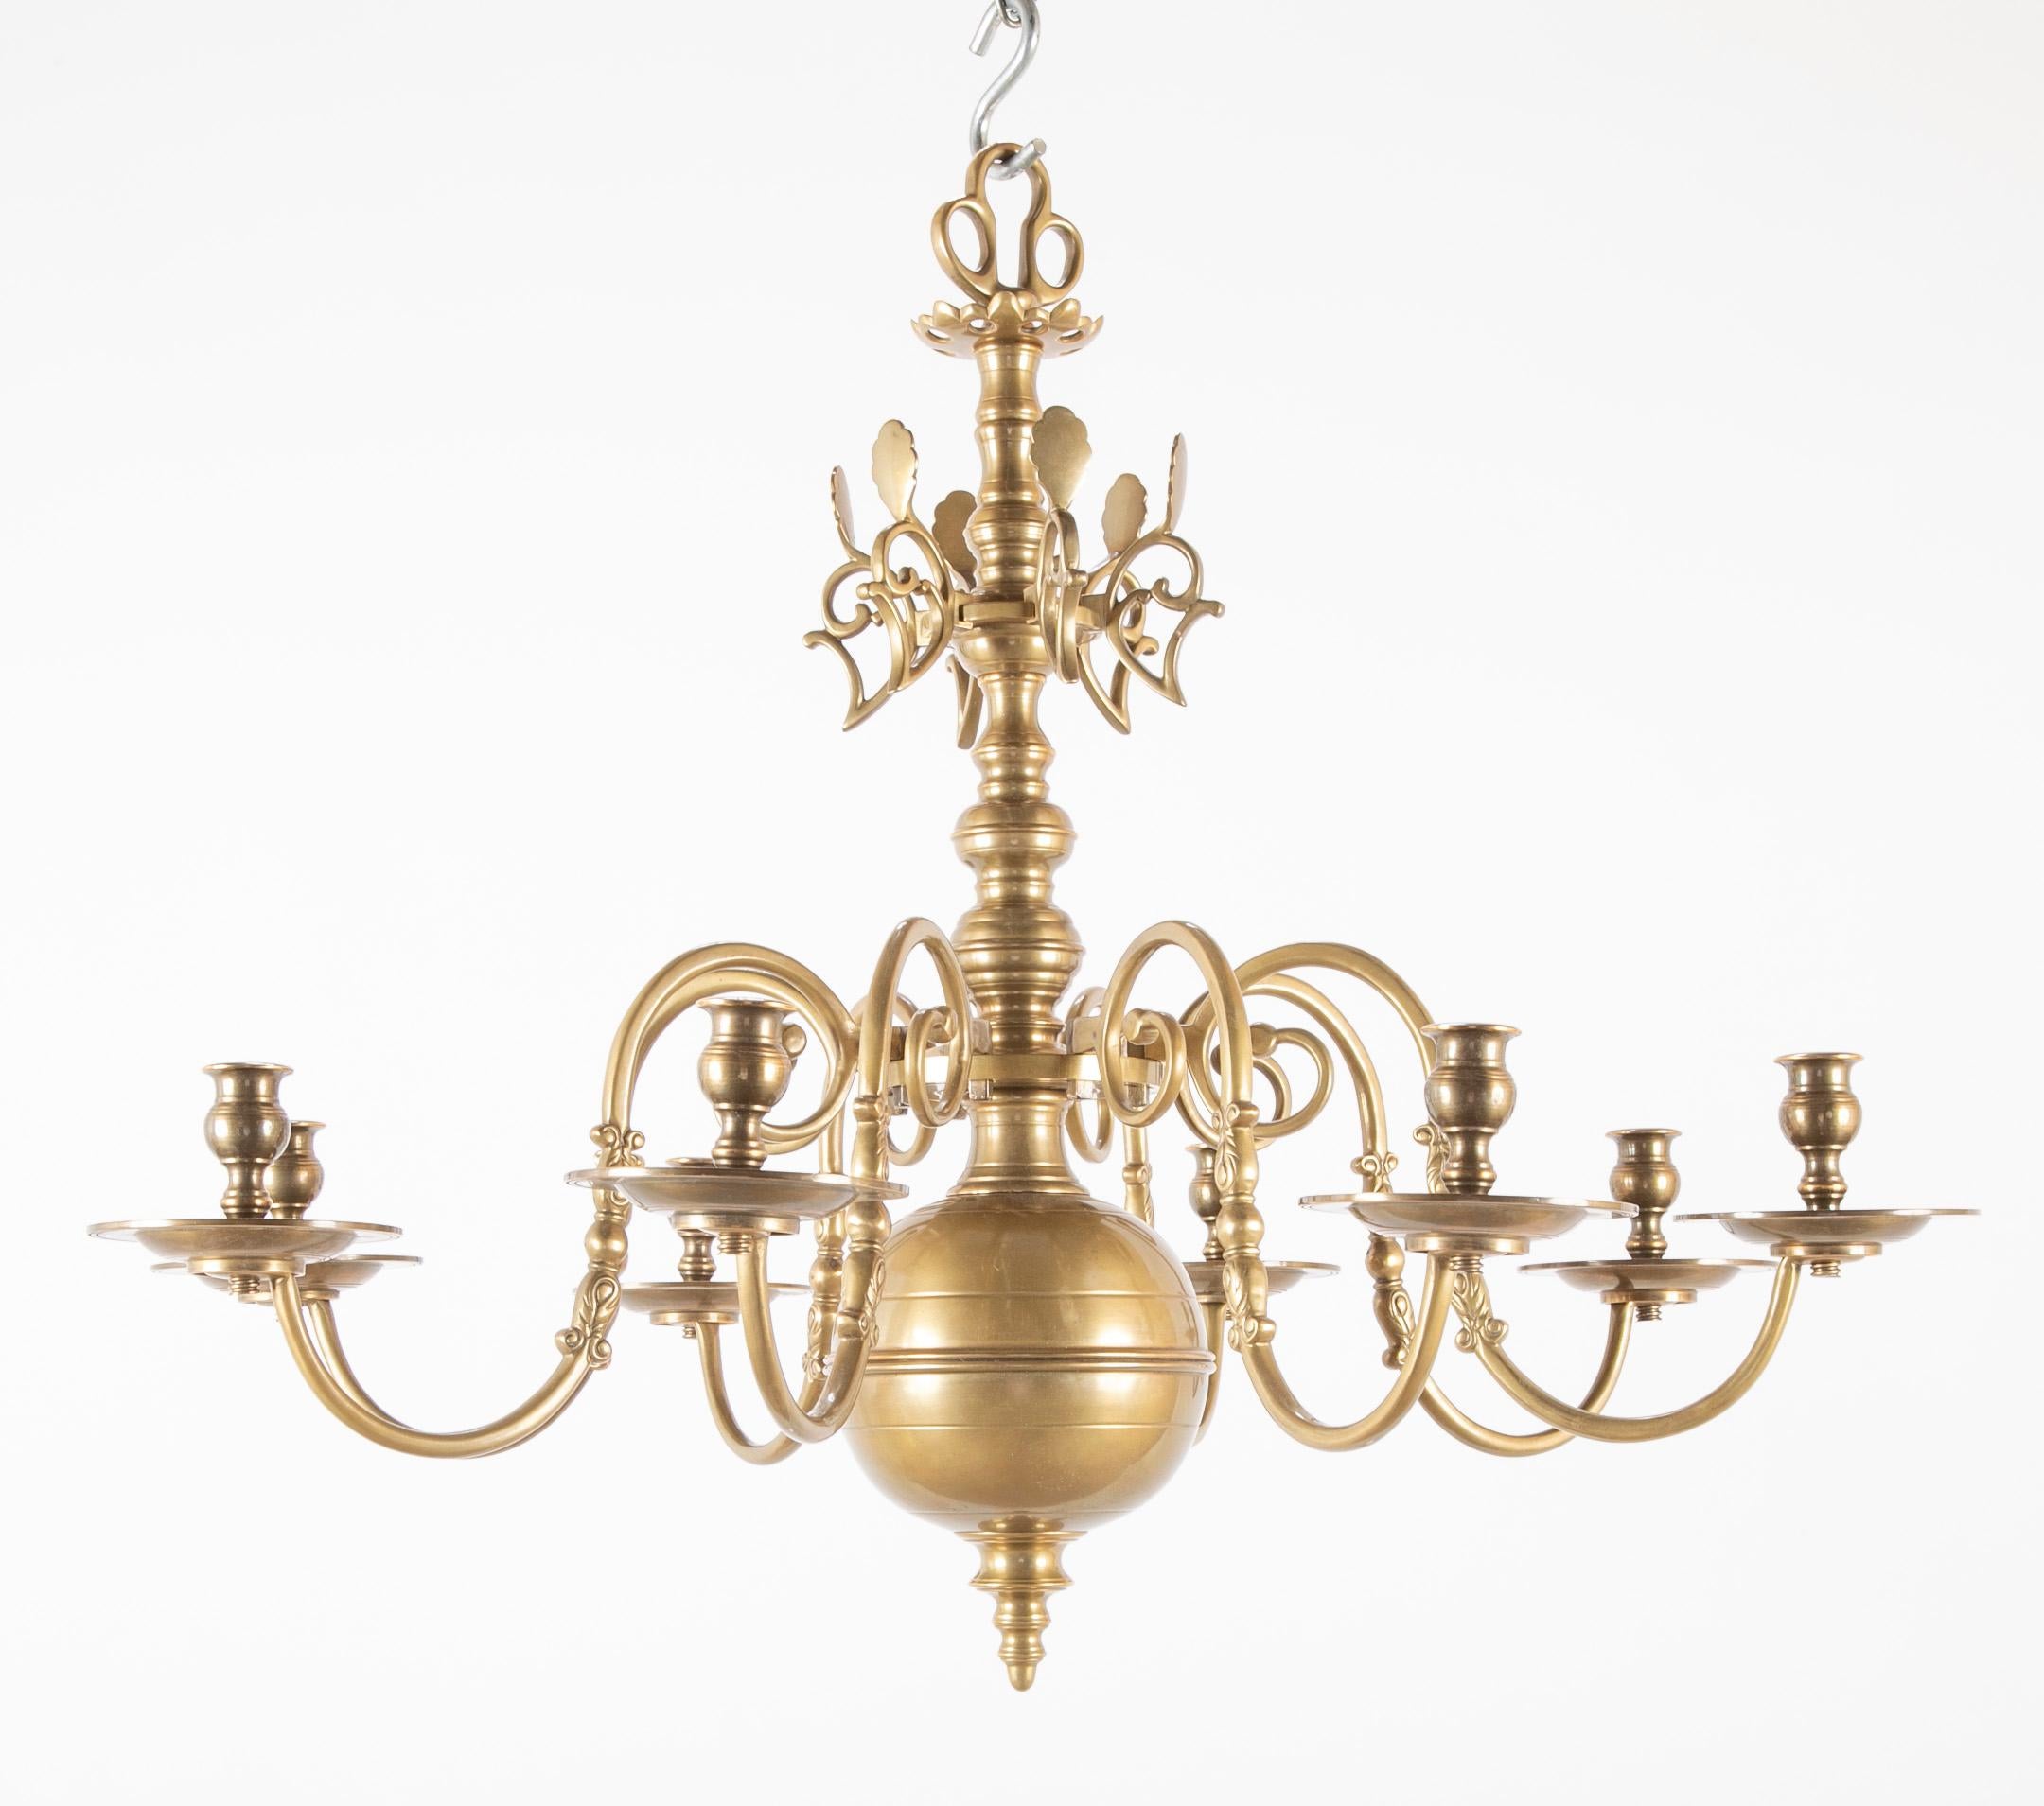 A solid cast brass Queen Anne style eight-arm chandelier with rare reflectors. Possibly Dutch.